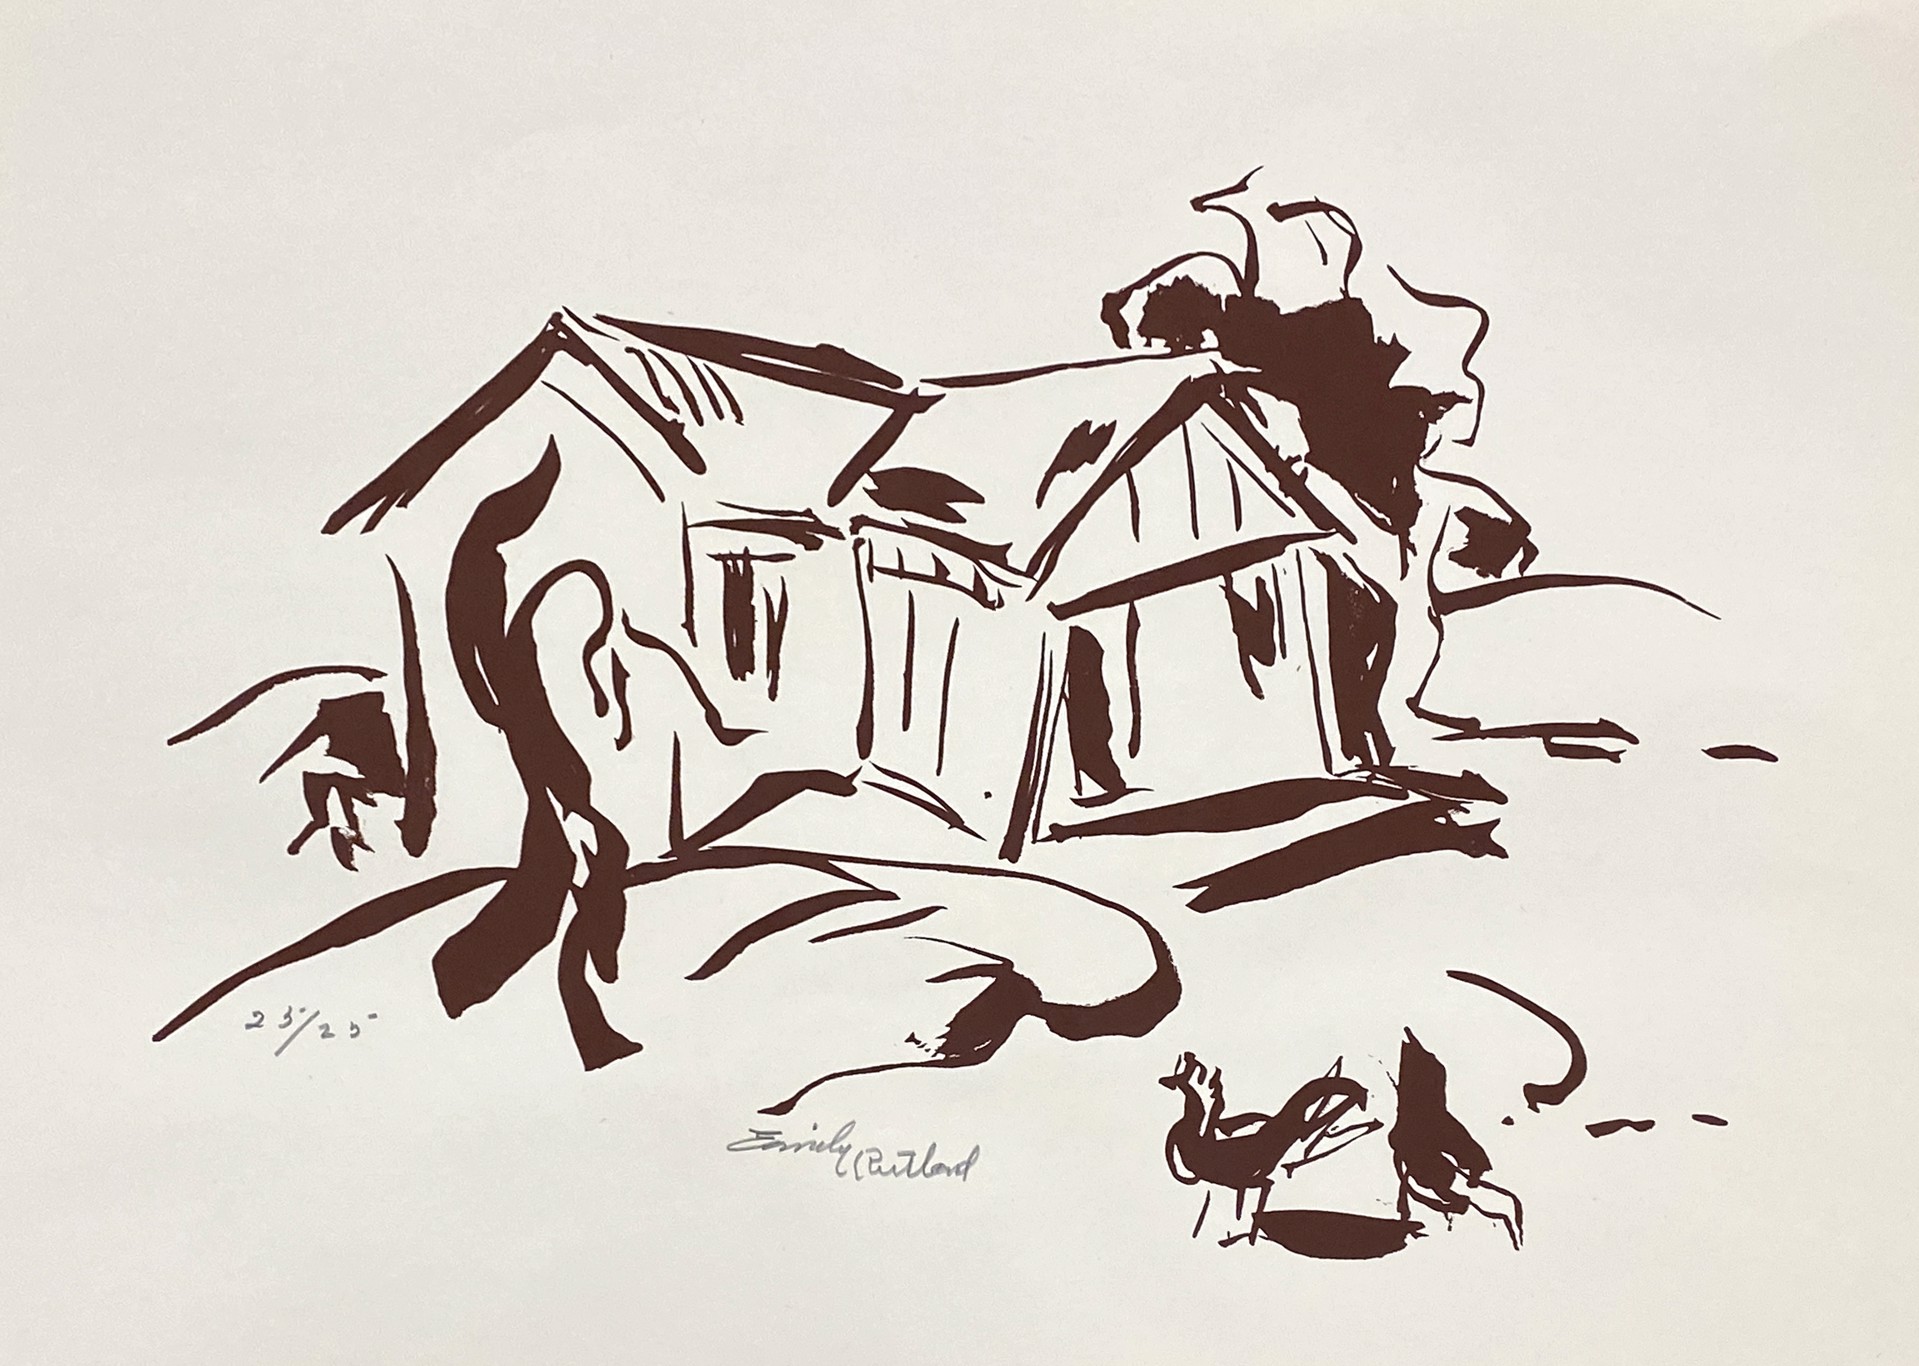 House with Chicken, Ed. 25/25 by Emily Rutland